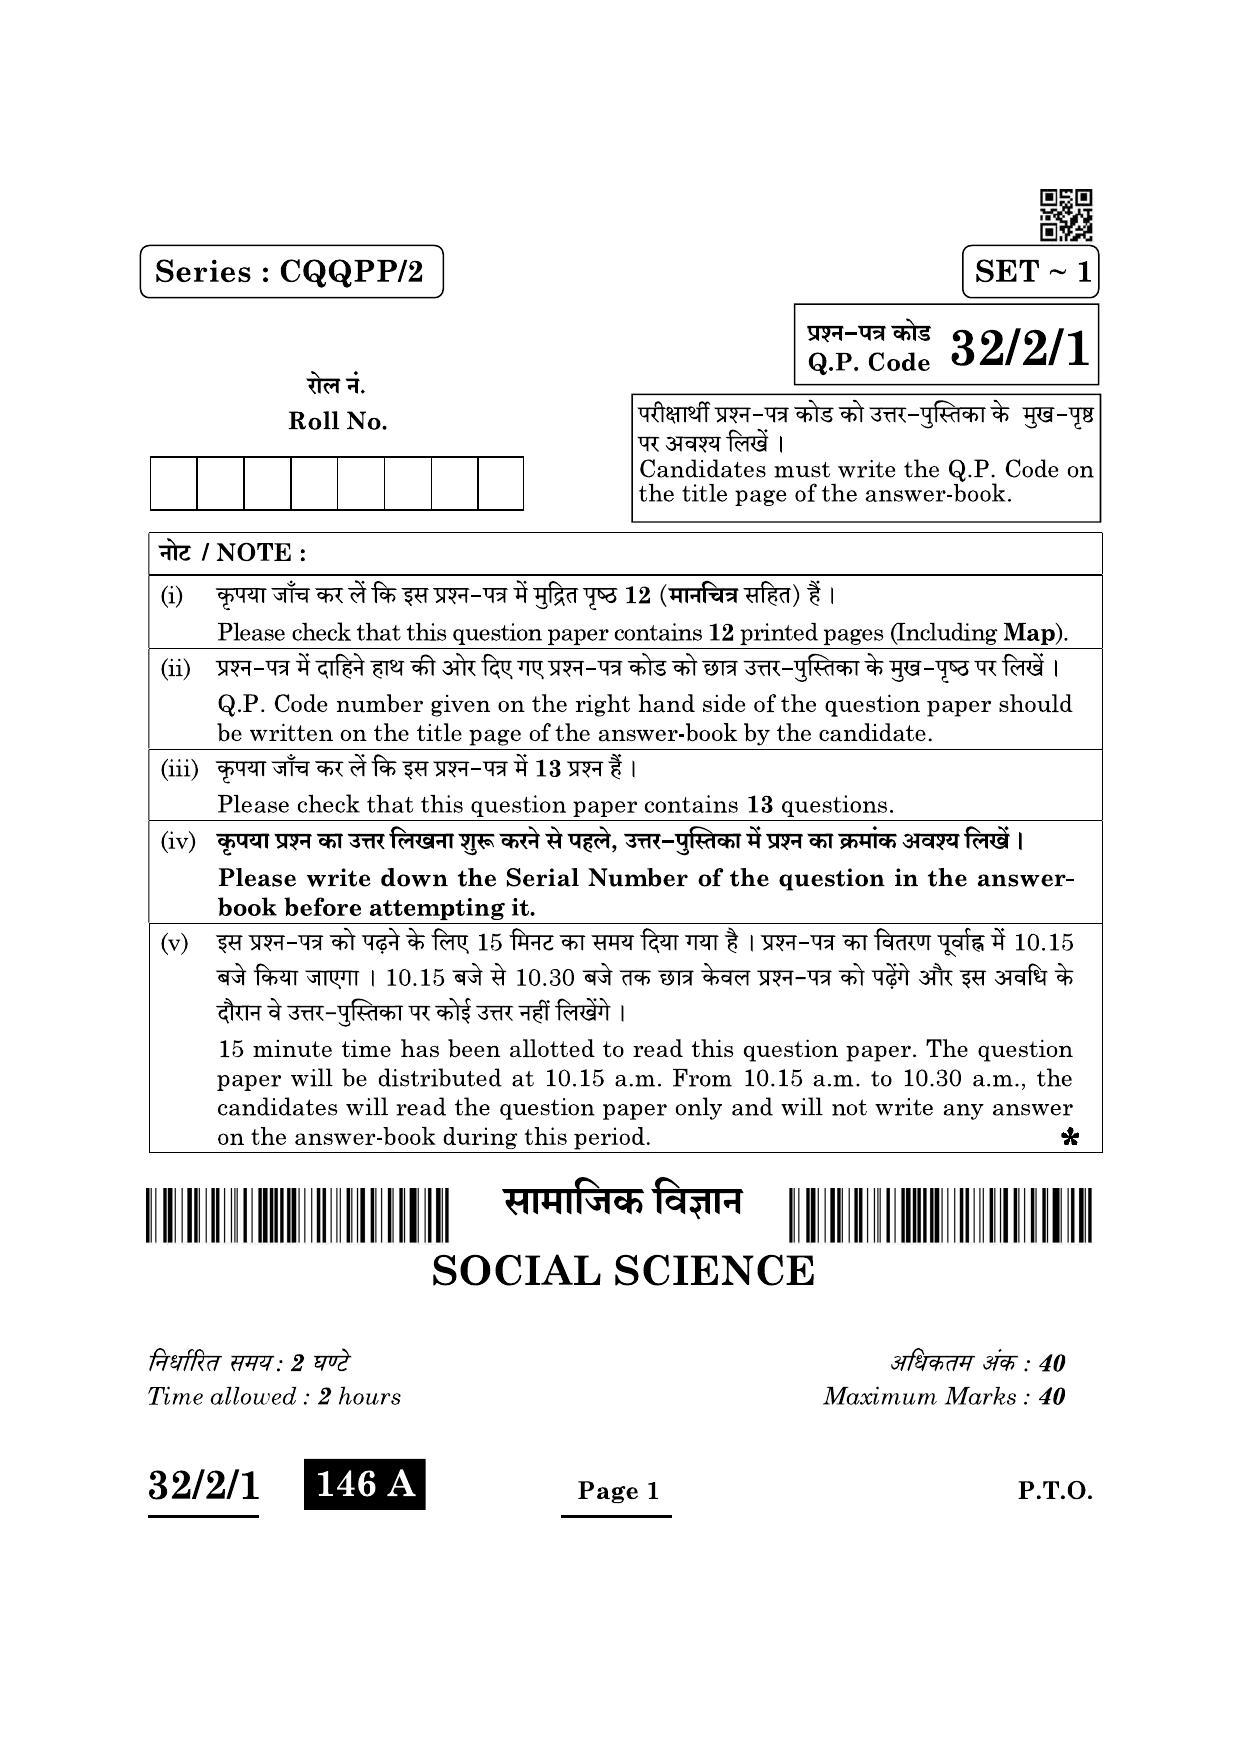 CBSE Class 10 32-2-1 Social Science 2022 Question Paper - Page 1